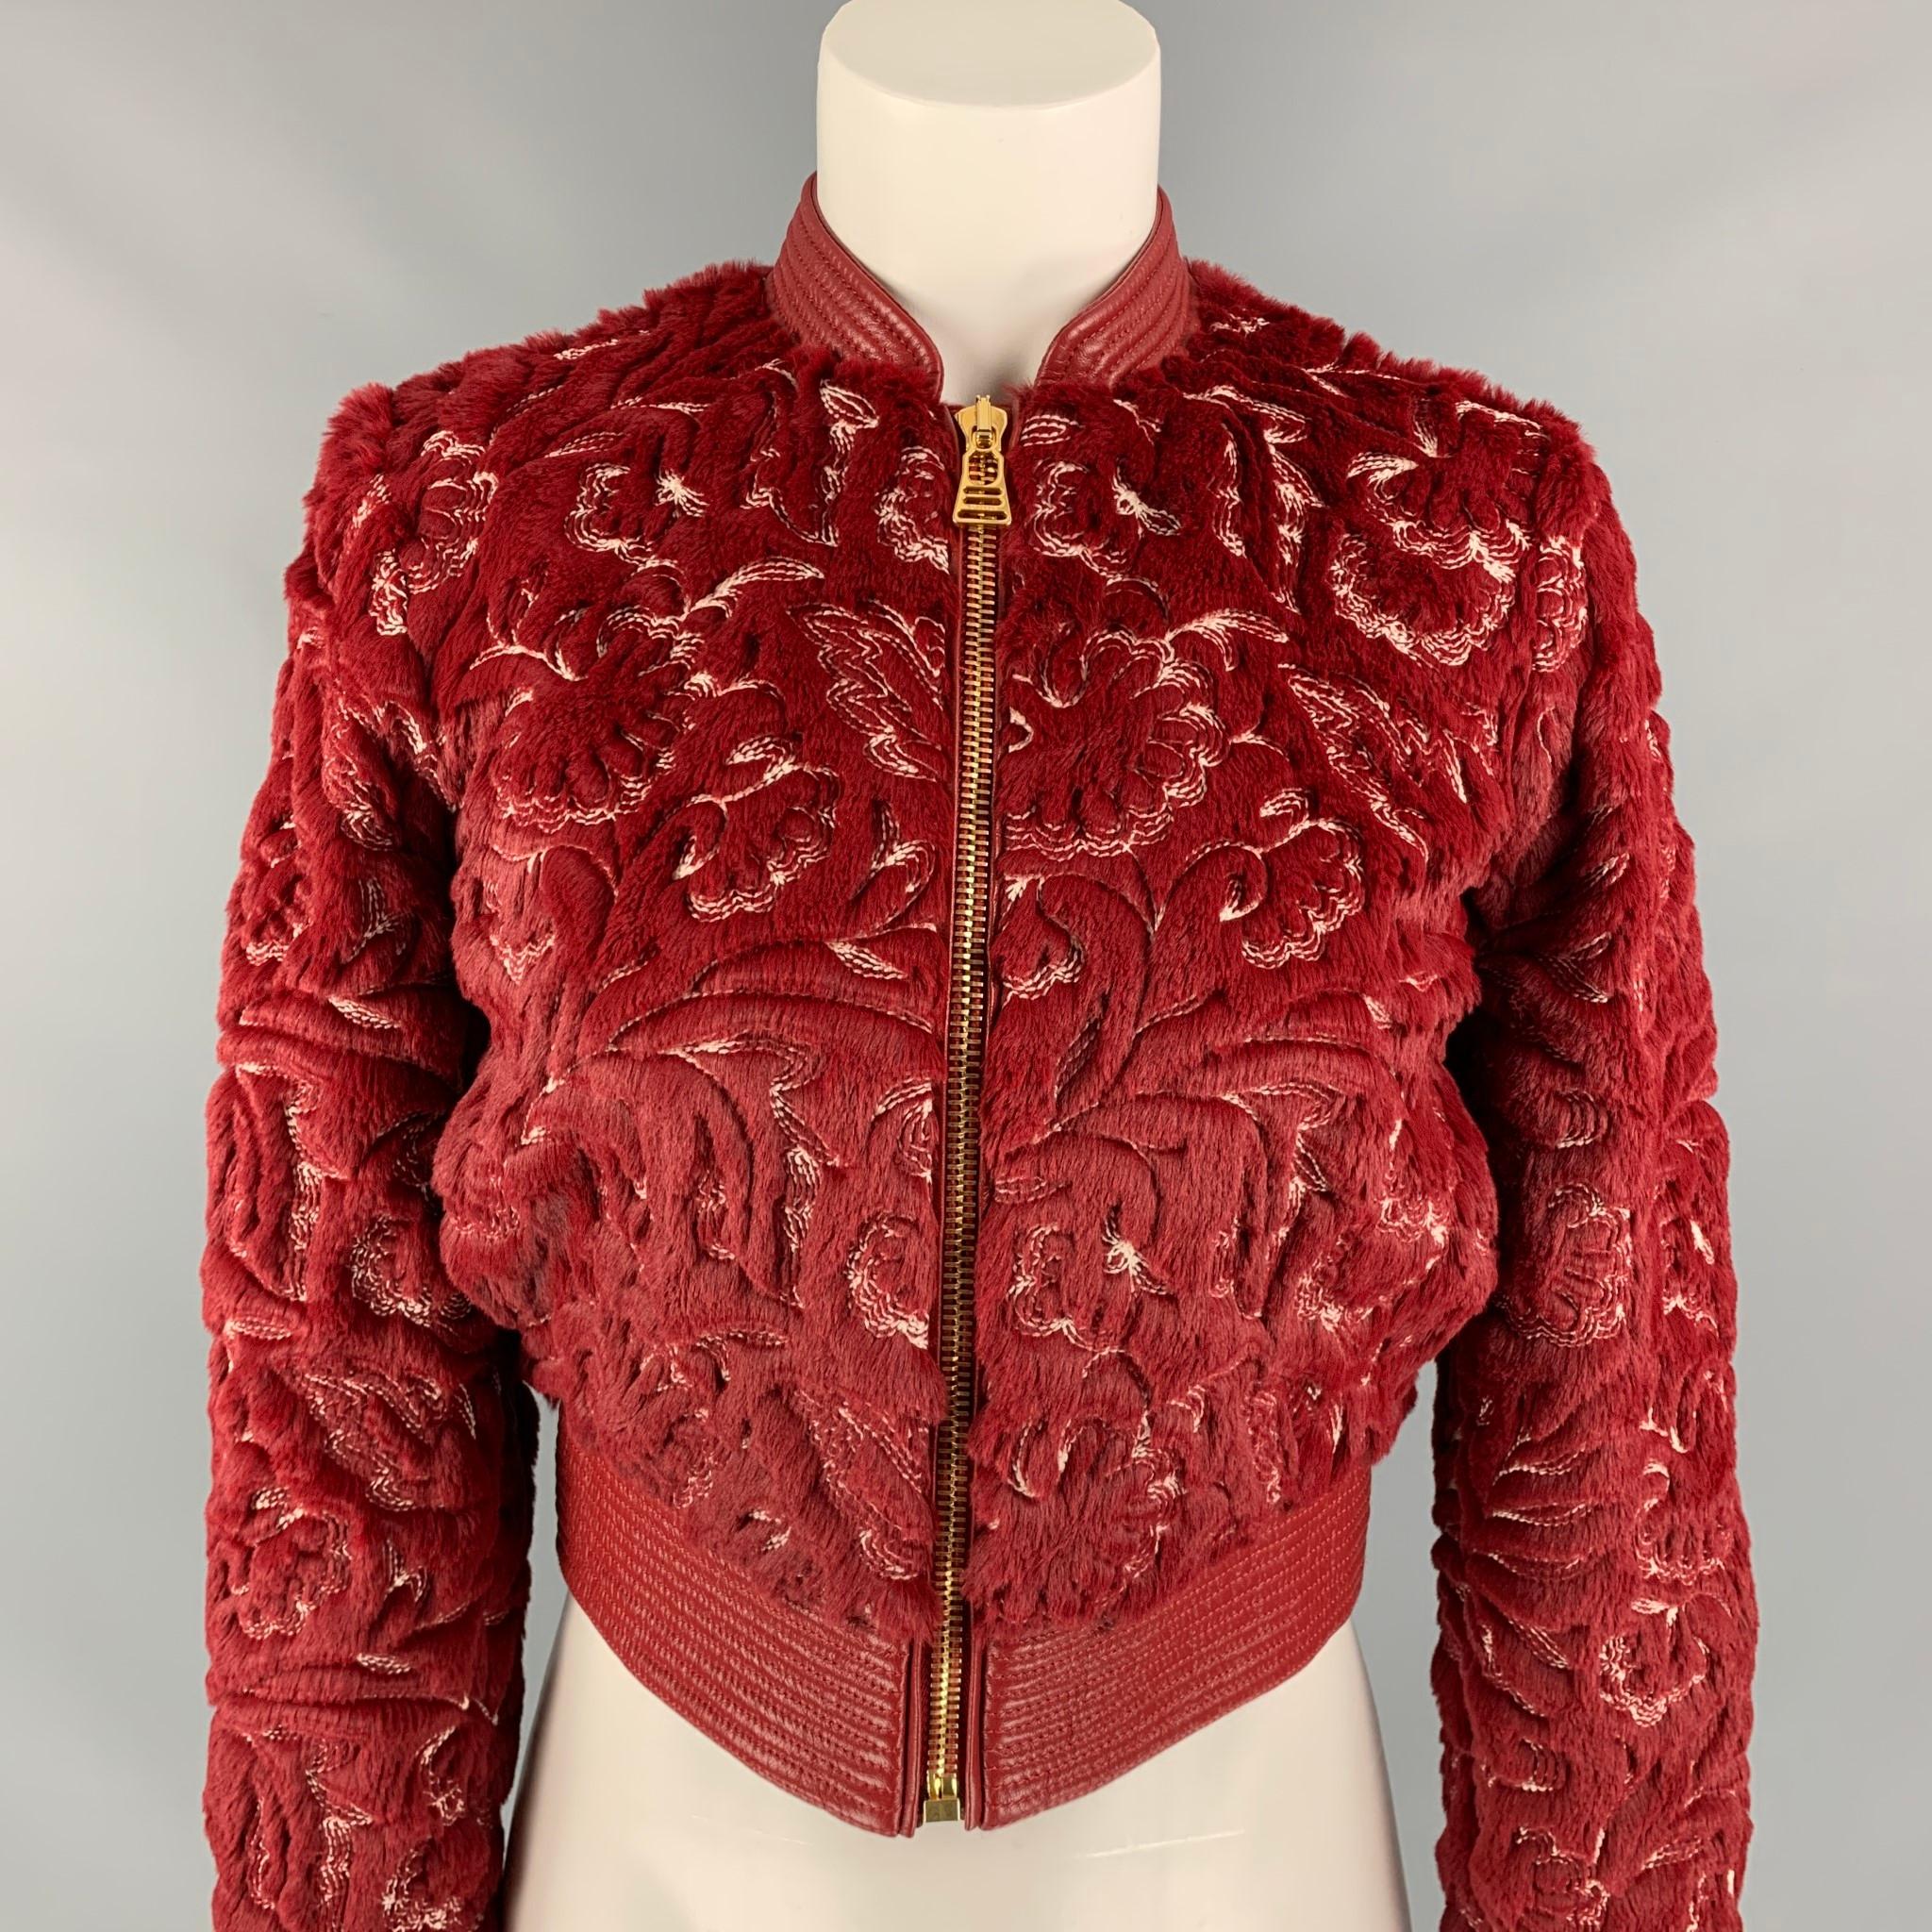 LA PERLA jacket comes in a red & white faux fur polyester / cotton with a full liner featuring a bomber style, leather trim, embroidered details throughout, slit pockets, and a gold toe zip up closure. 

New With Tags. 
Marked: IT 36 / FR 32/ DE 30